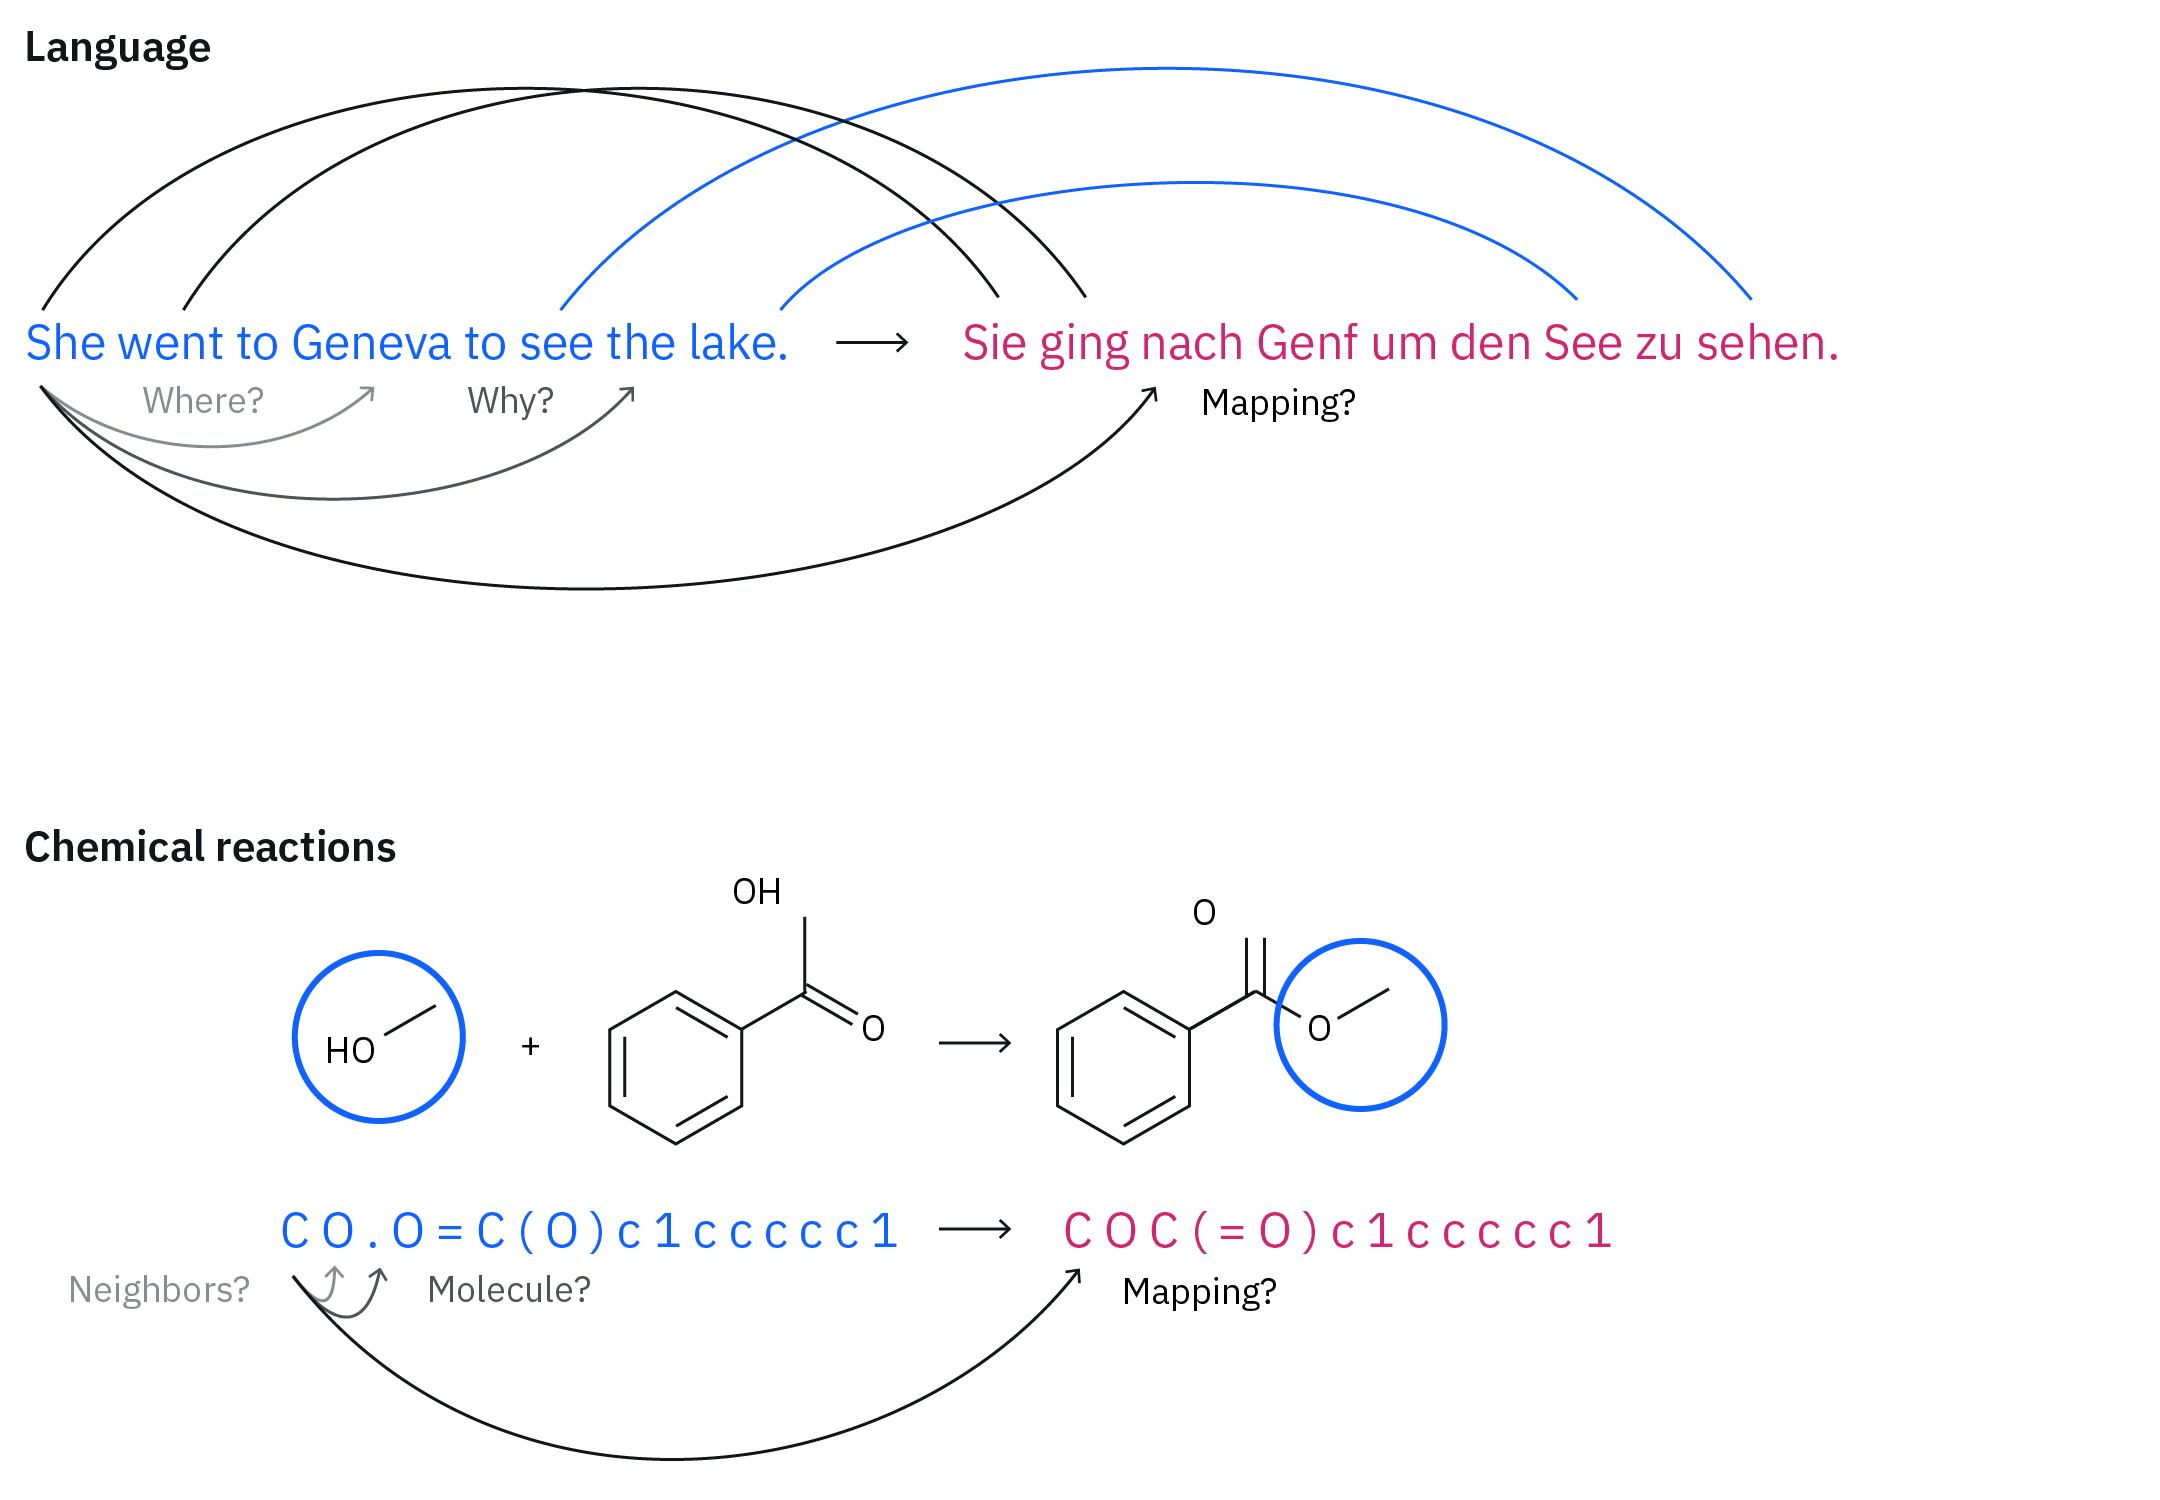 Top: A mapping between an English phrase and the German translation. Bottom: A mapping between reactants (methanol + benzoic acid) and a product molecule (methyl benzoate) in a chemical reaction represented with a text-based line notation called SMILES.